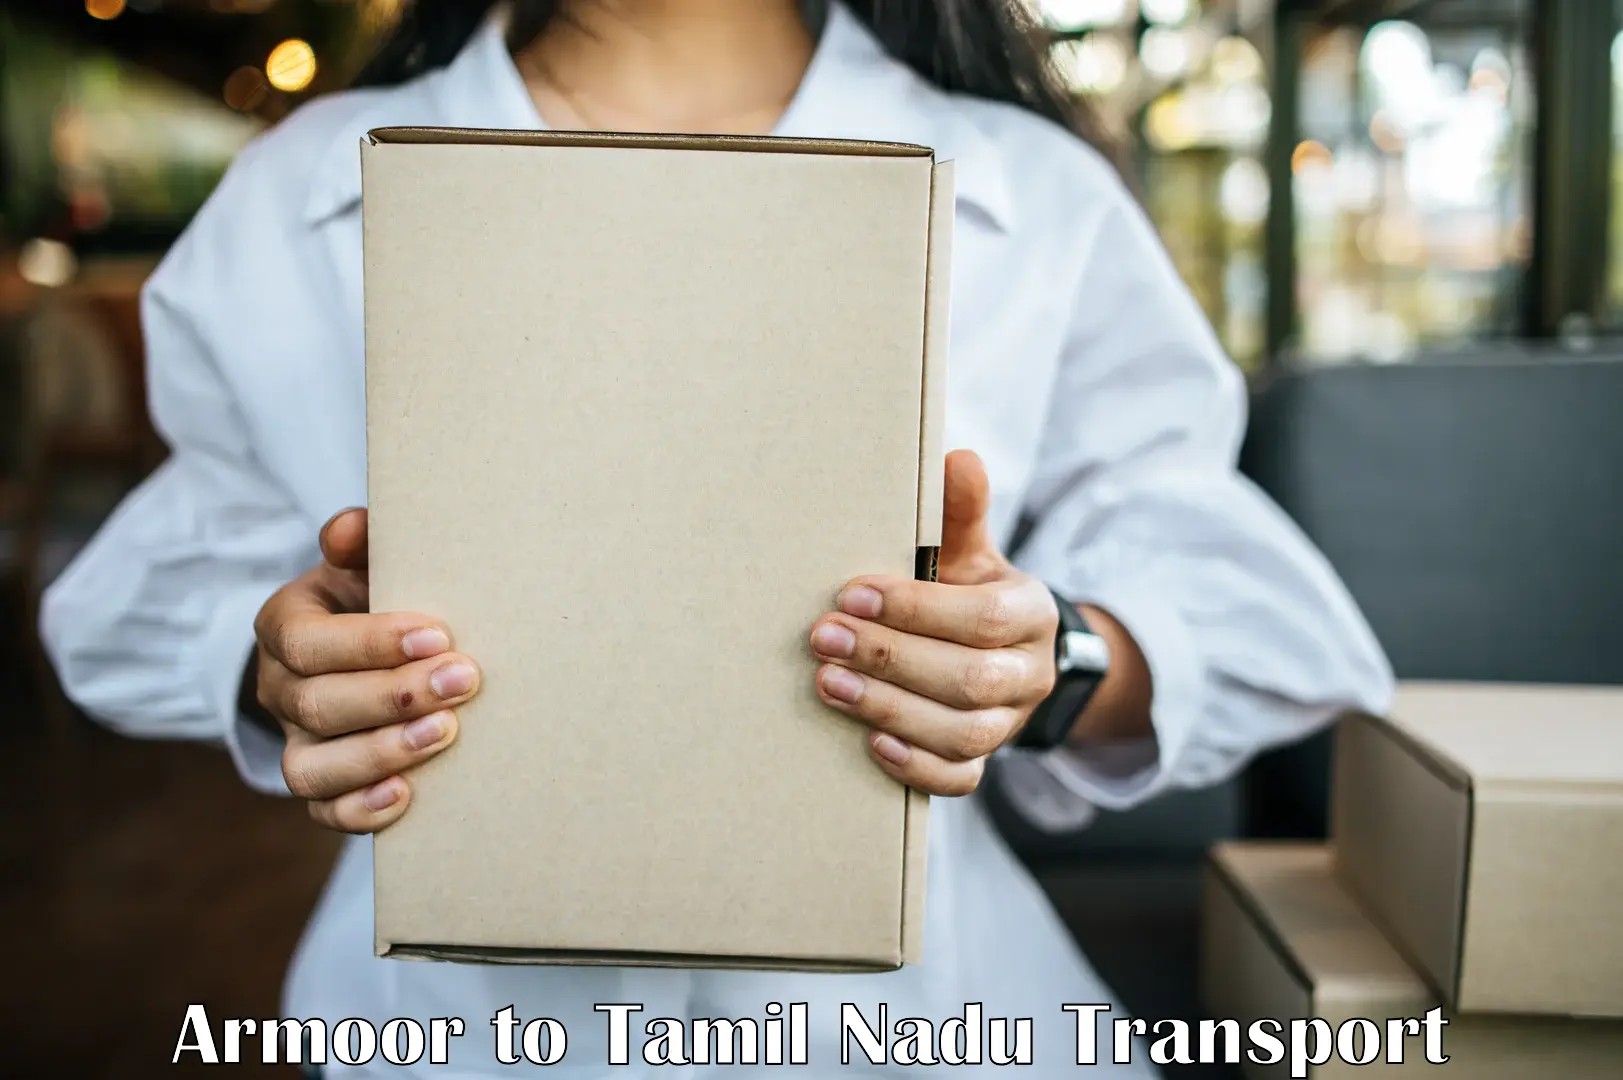 Truck transport companies in India Armoor to Chennai